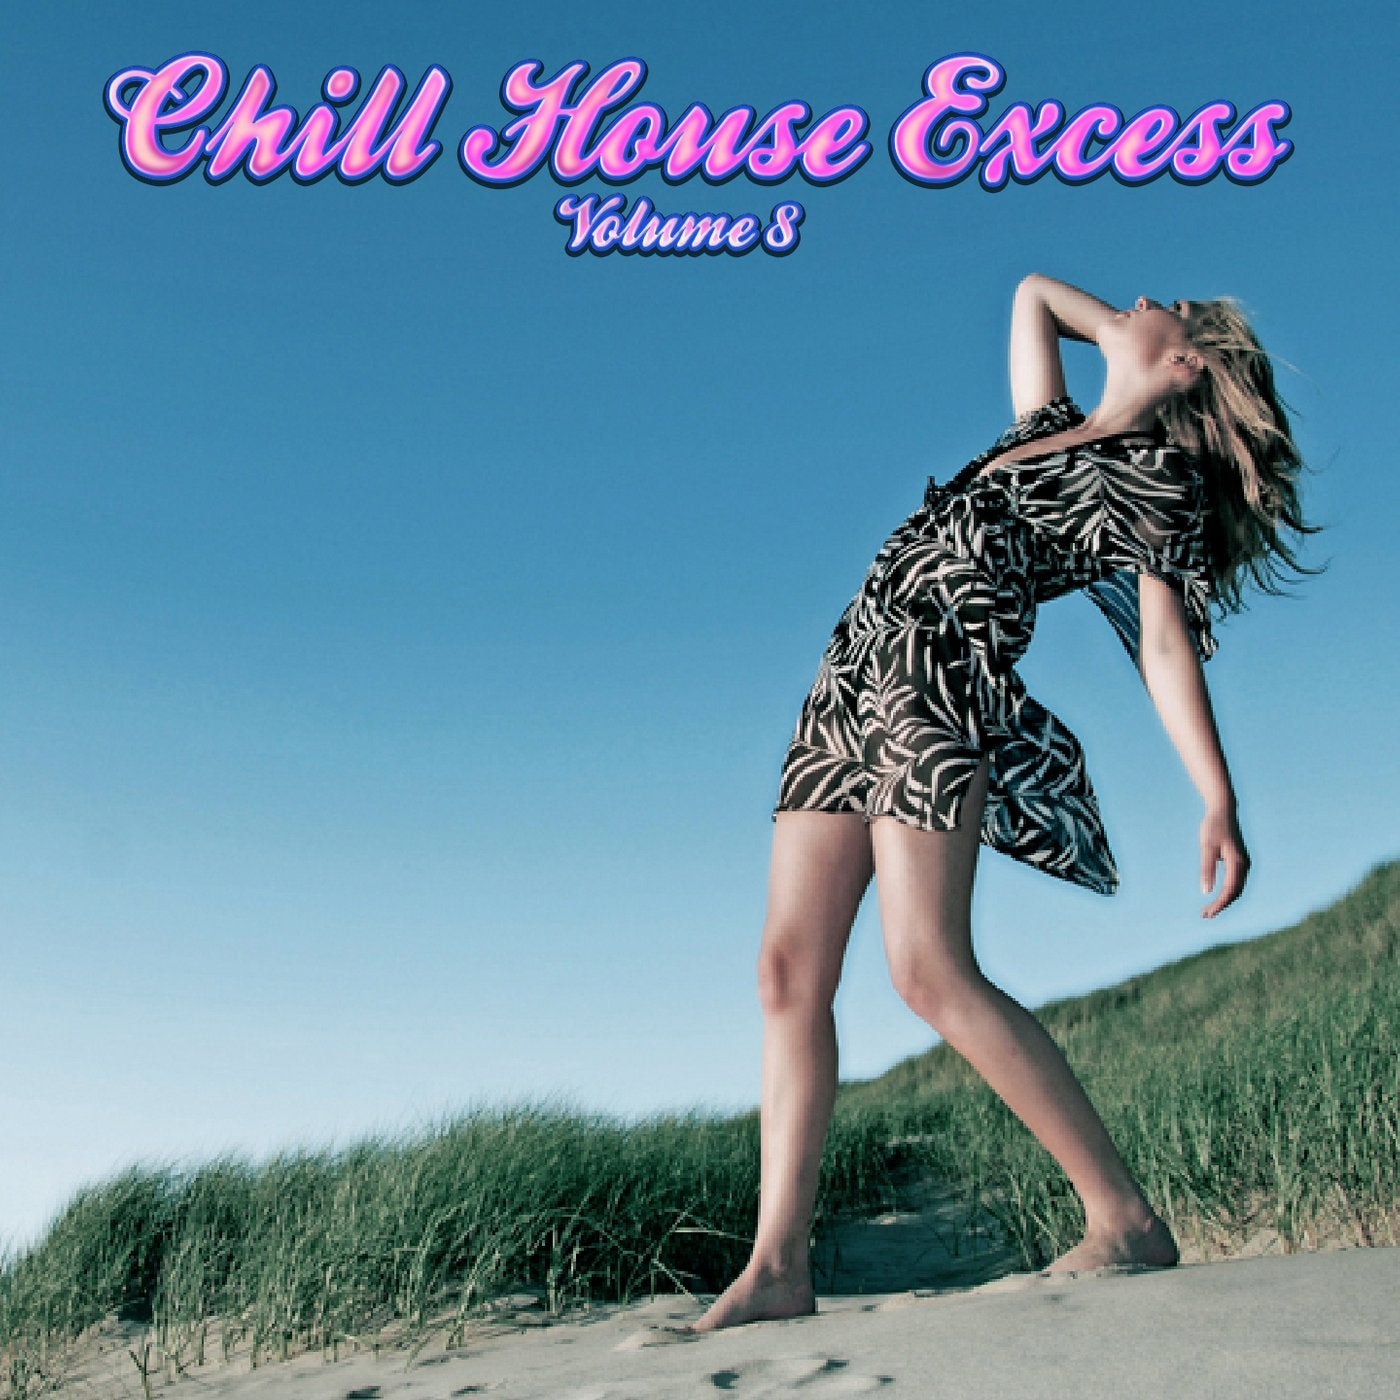 Chill House Excess, Vol.8 (Best Selection of Lounge & Chill House Tracks)